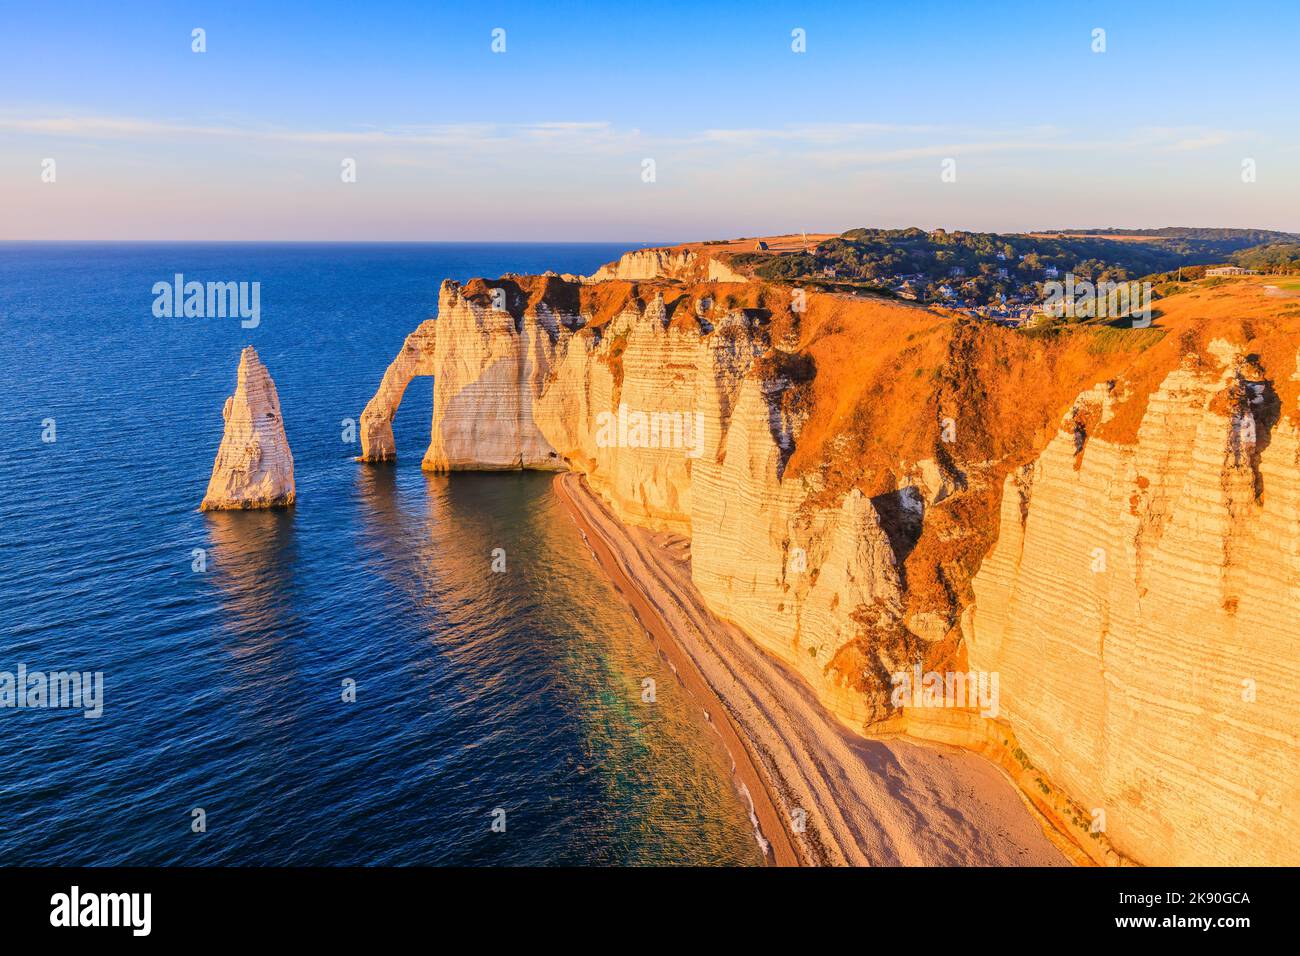 Normandy, France. Etretat village cliffs with the Porte d'Aval arch and the rock known as the Aiguille d'Etretat. Stock Photo